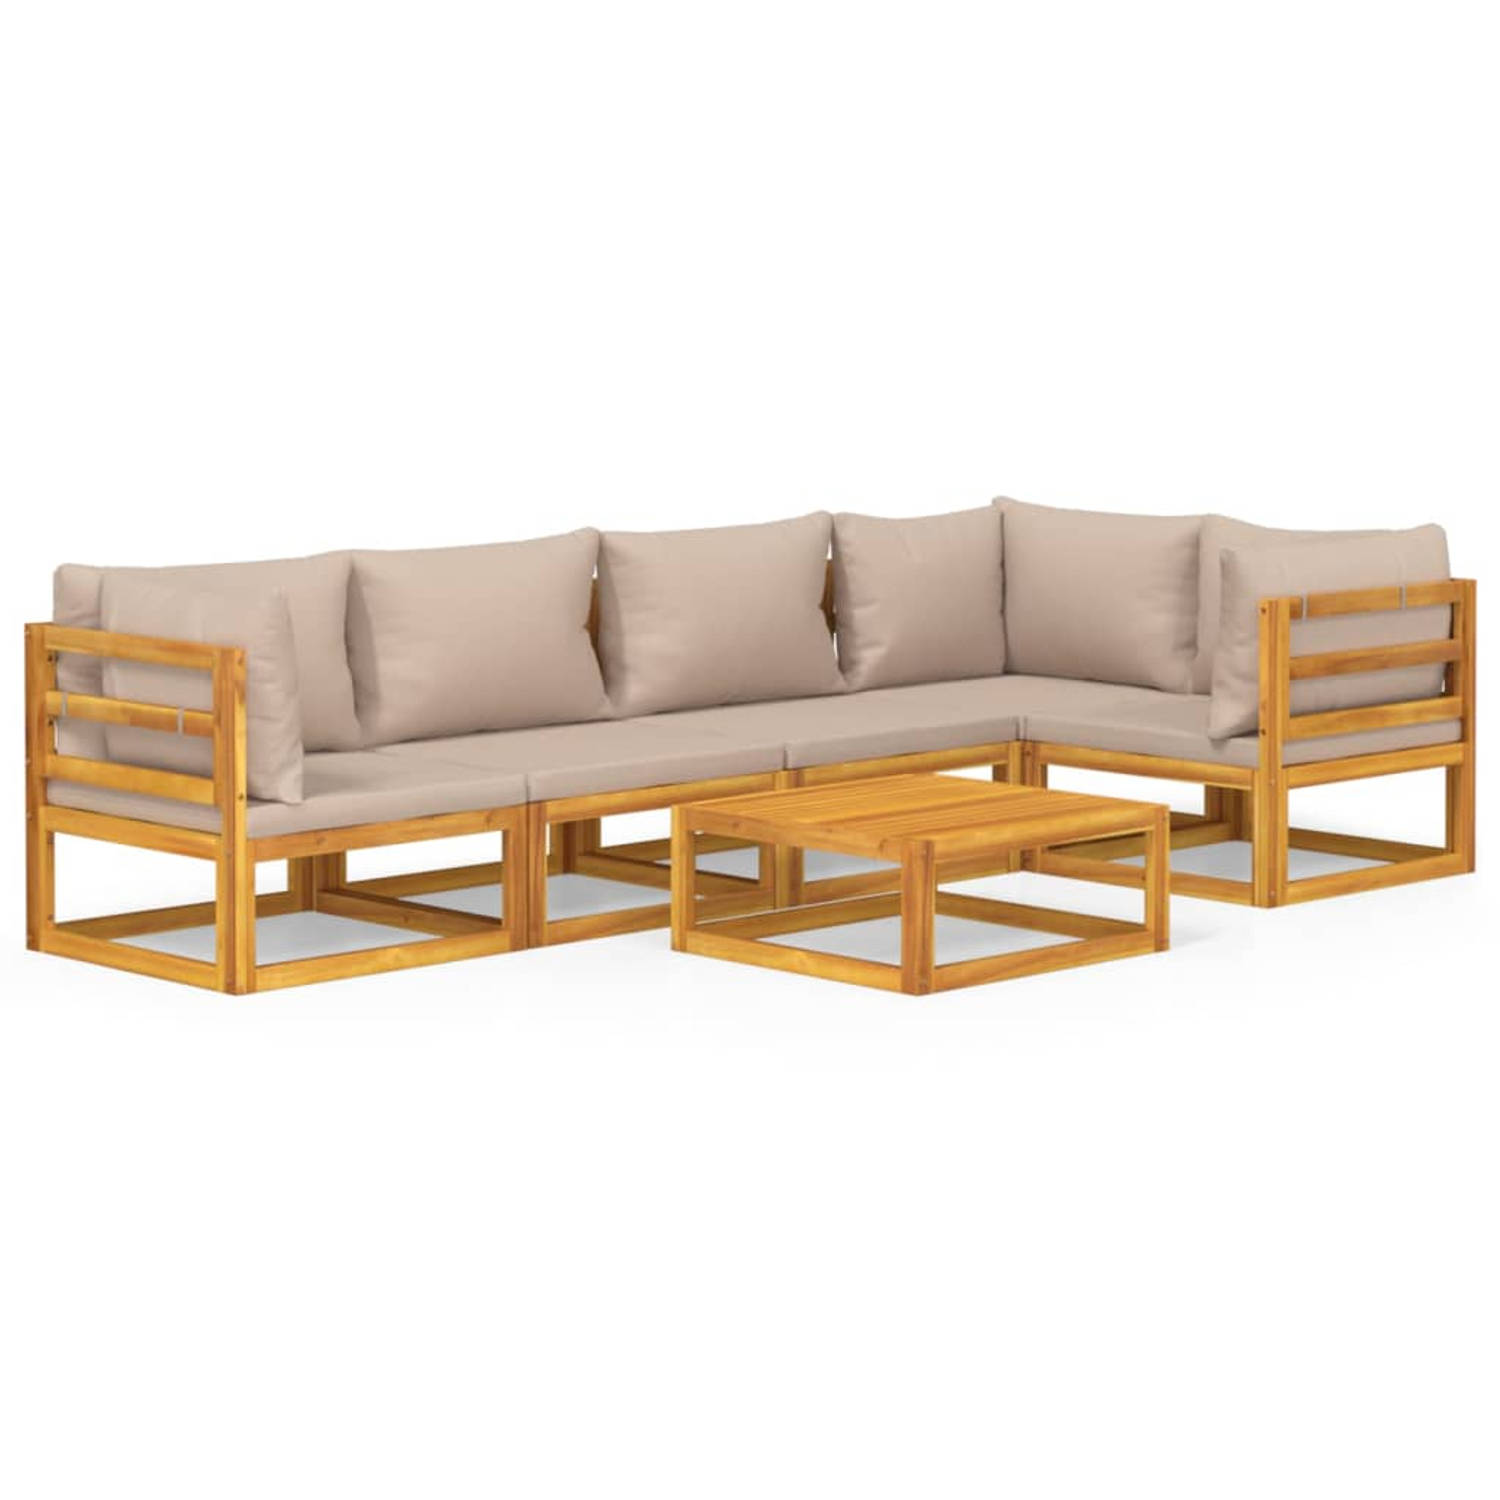 The Living Store 6-delige Loungeset met taupe kussens massief hout - Tuinset